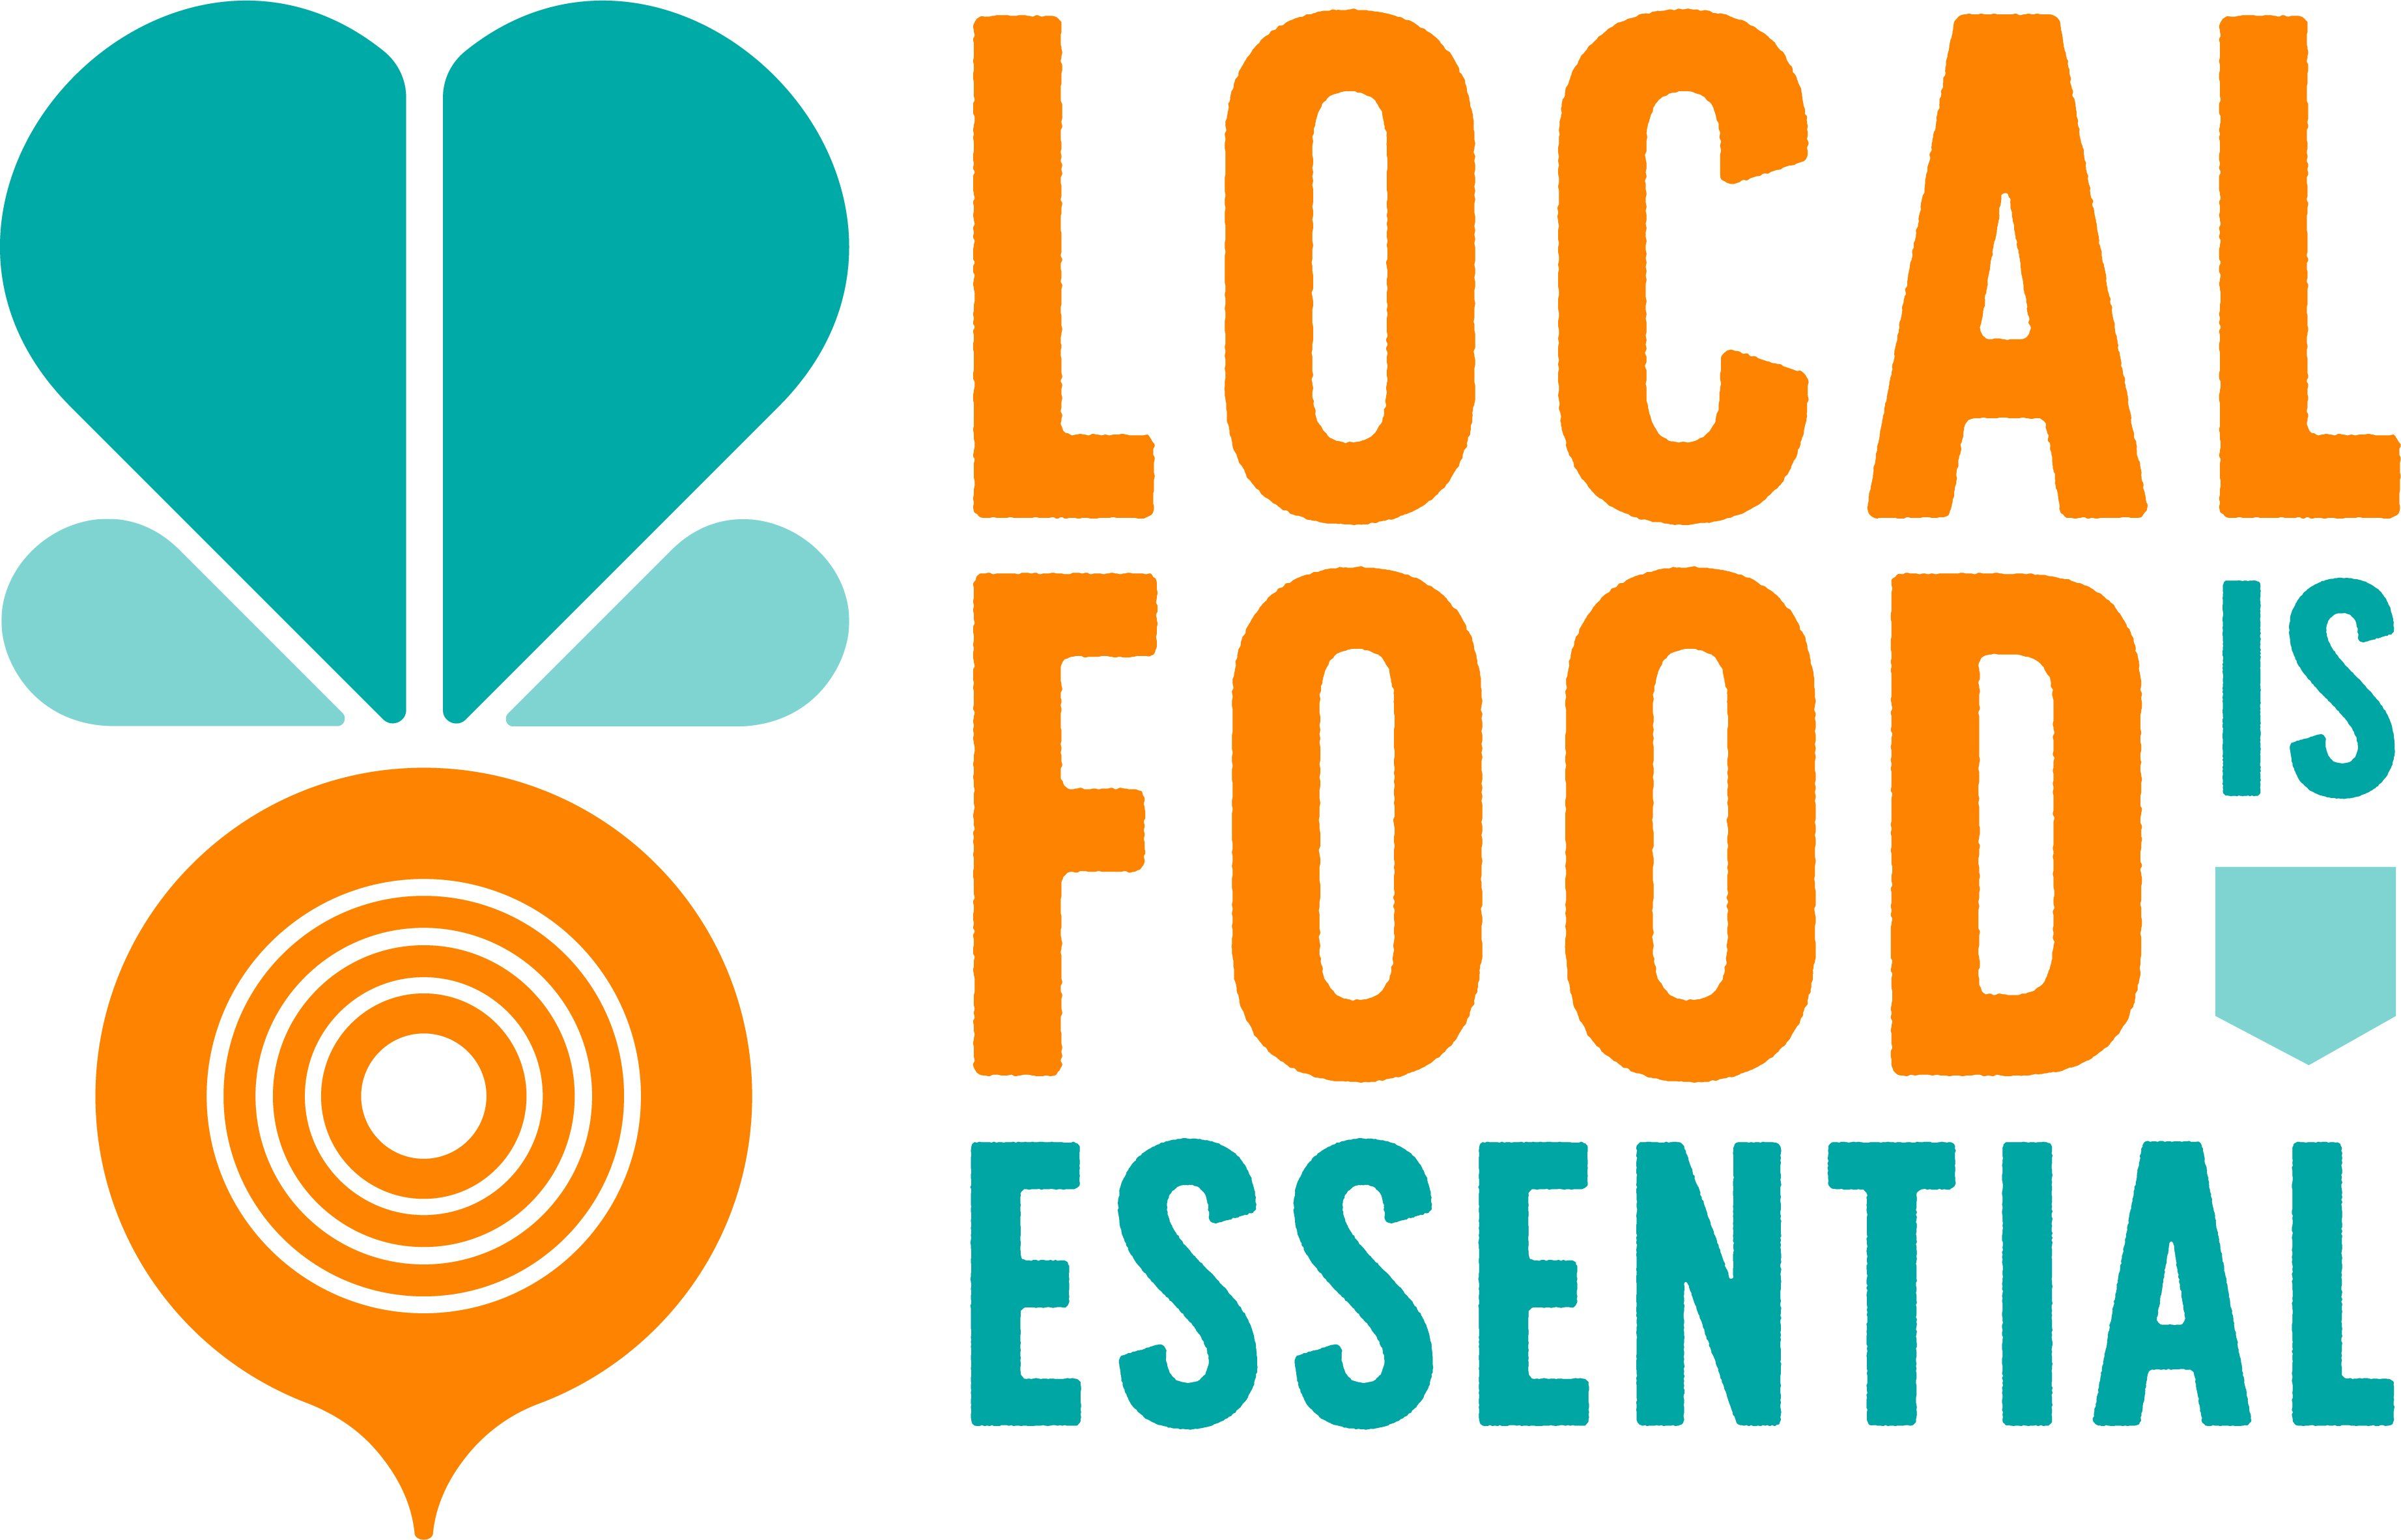 Next Happening: Local Food is Essential